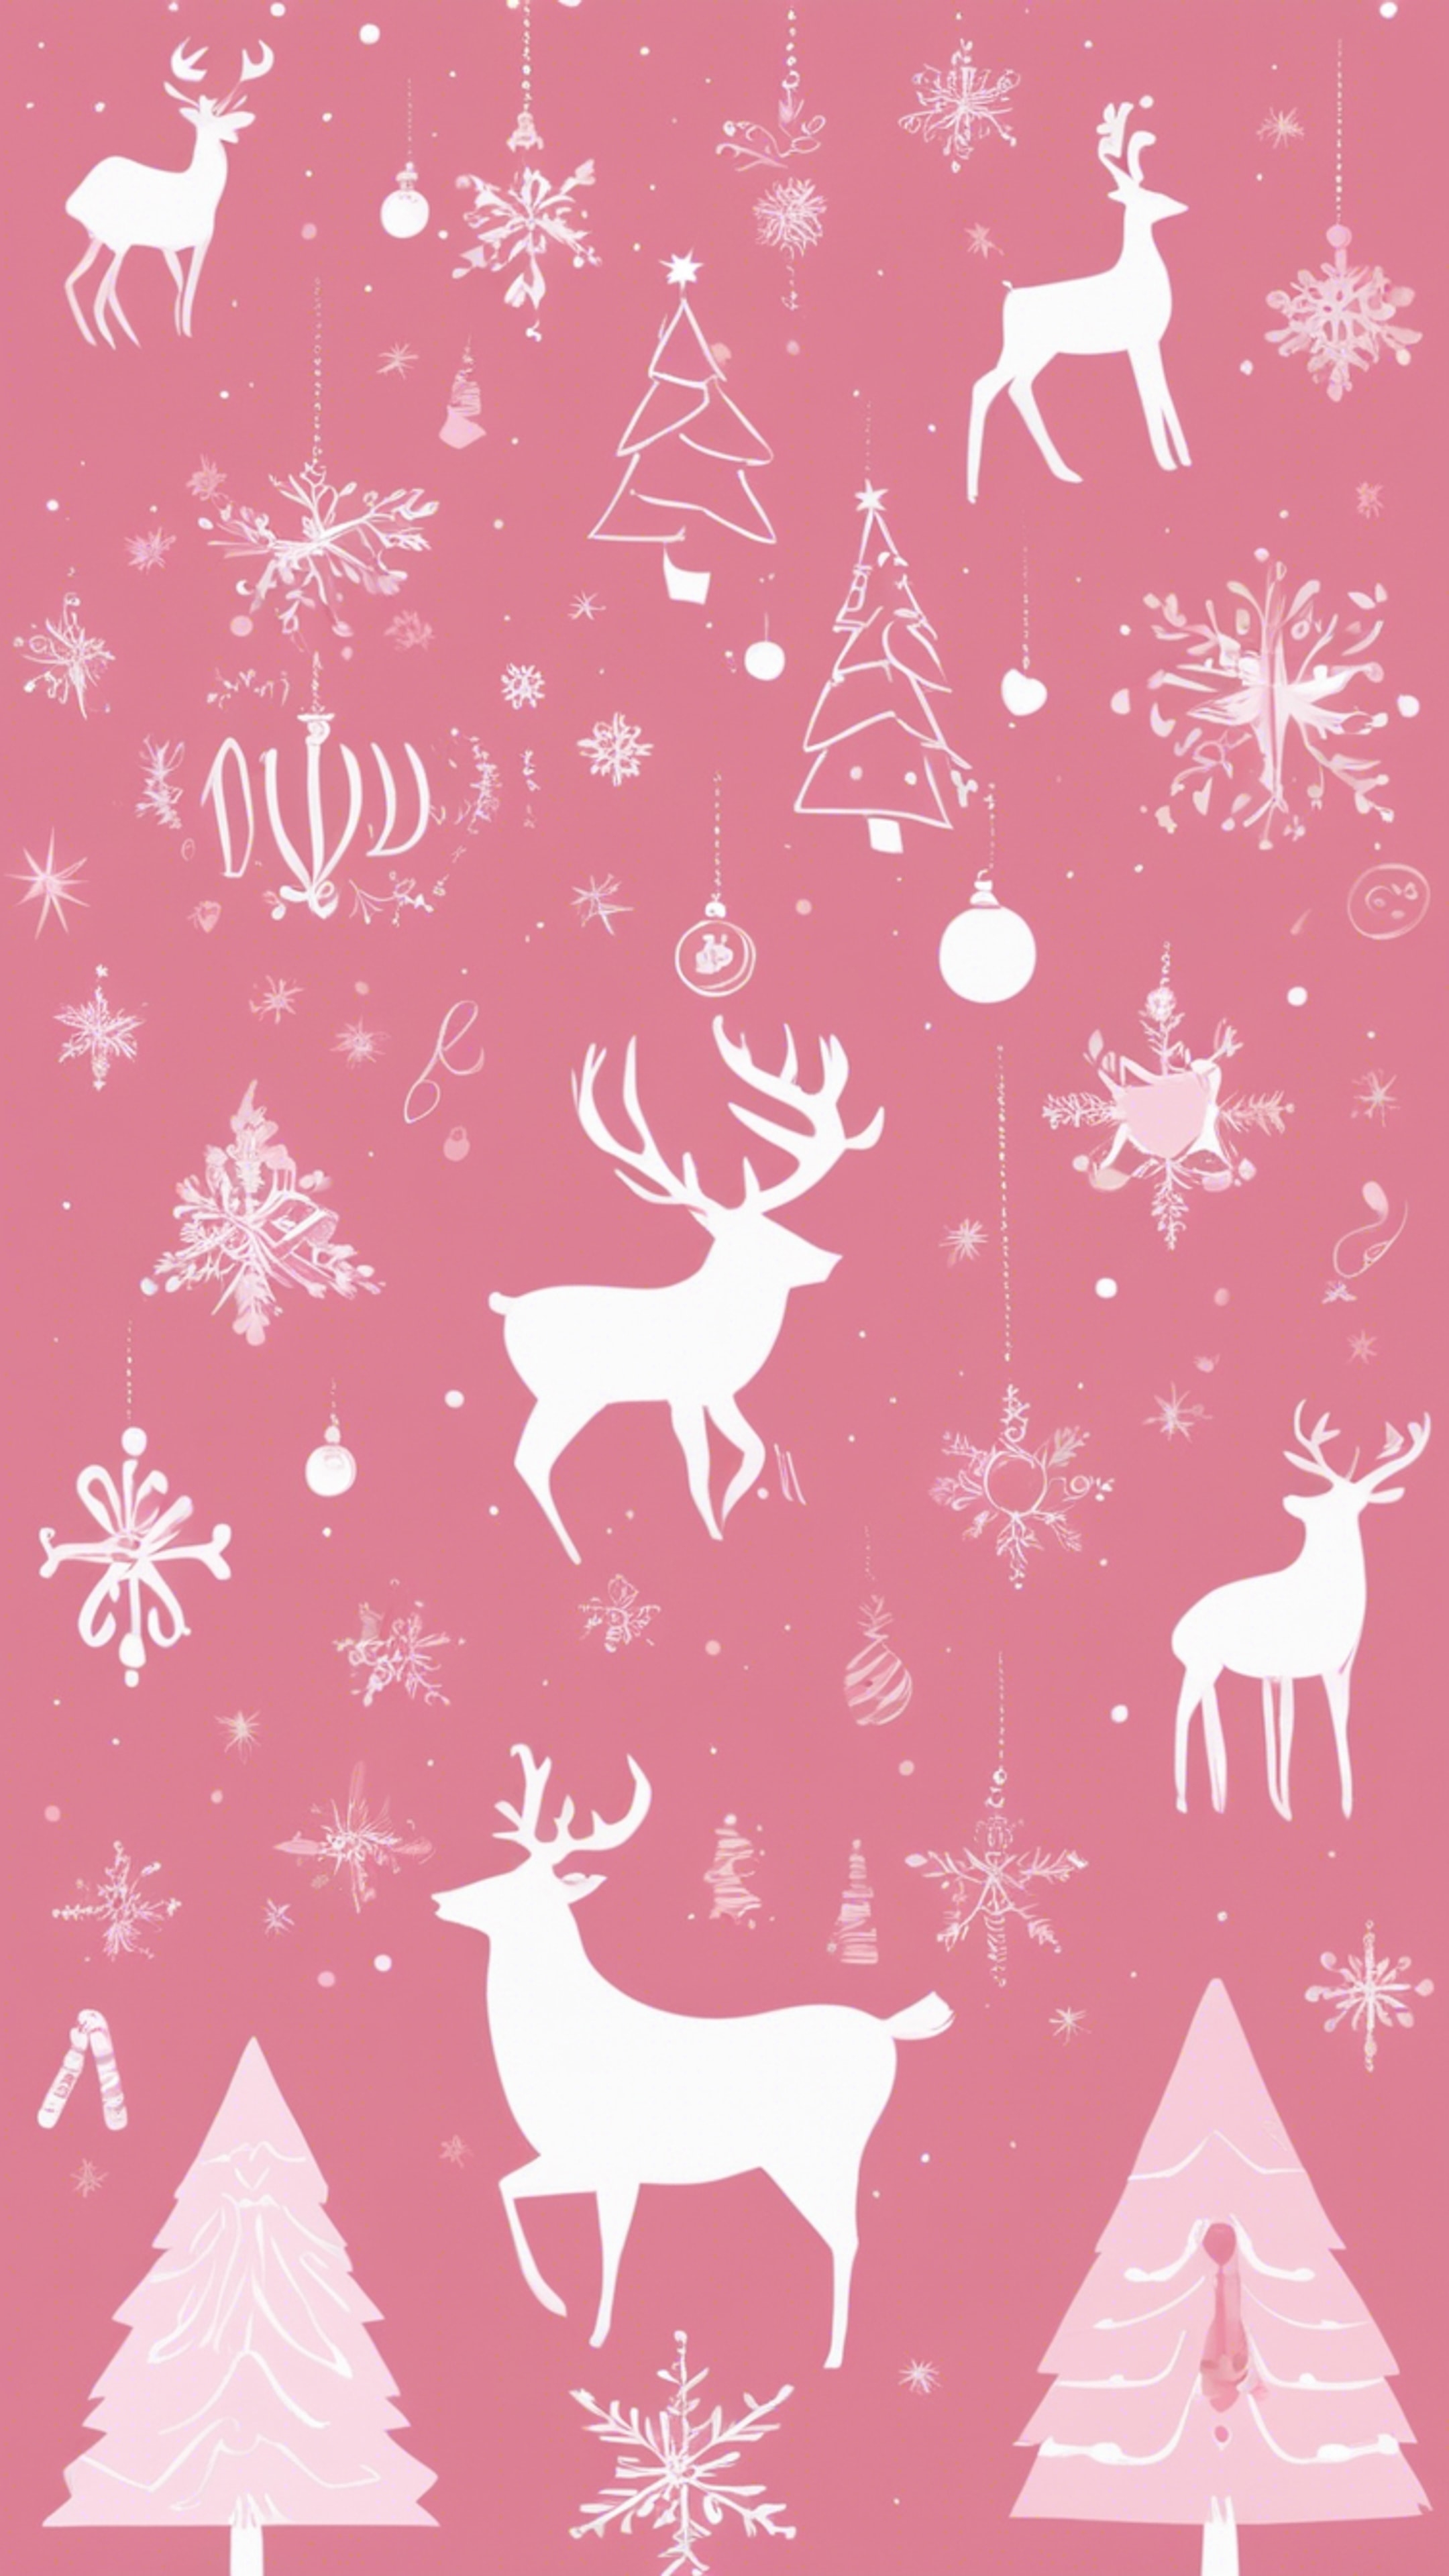 A minimally designed Christmas card with elegant pink illustrations of Christmas icons. Ფონი[9459a801713f4624aabe]